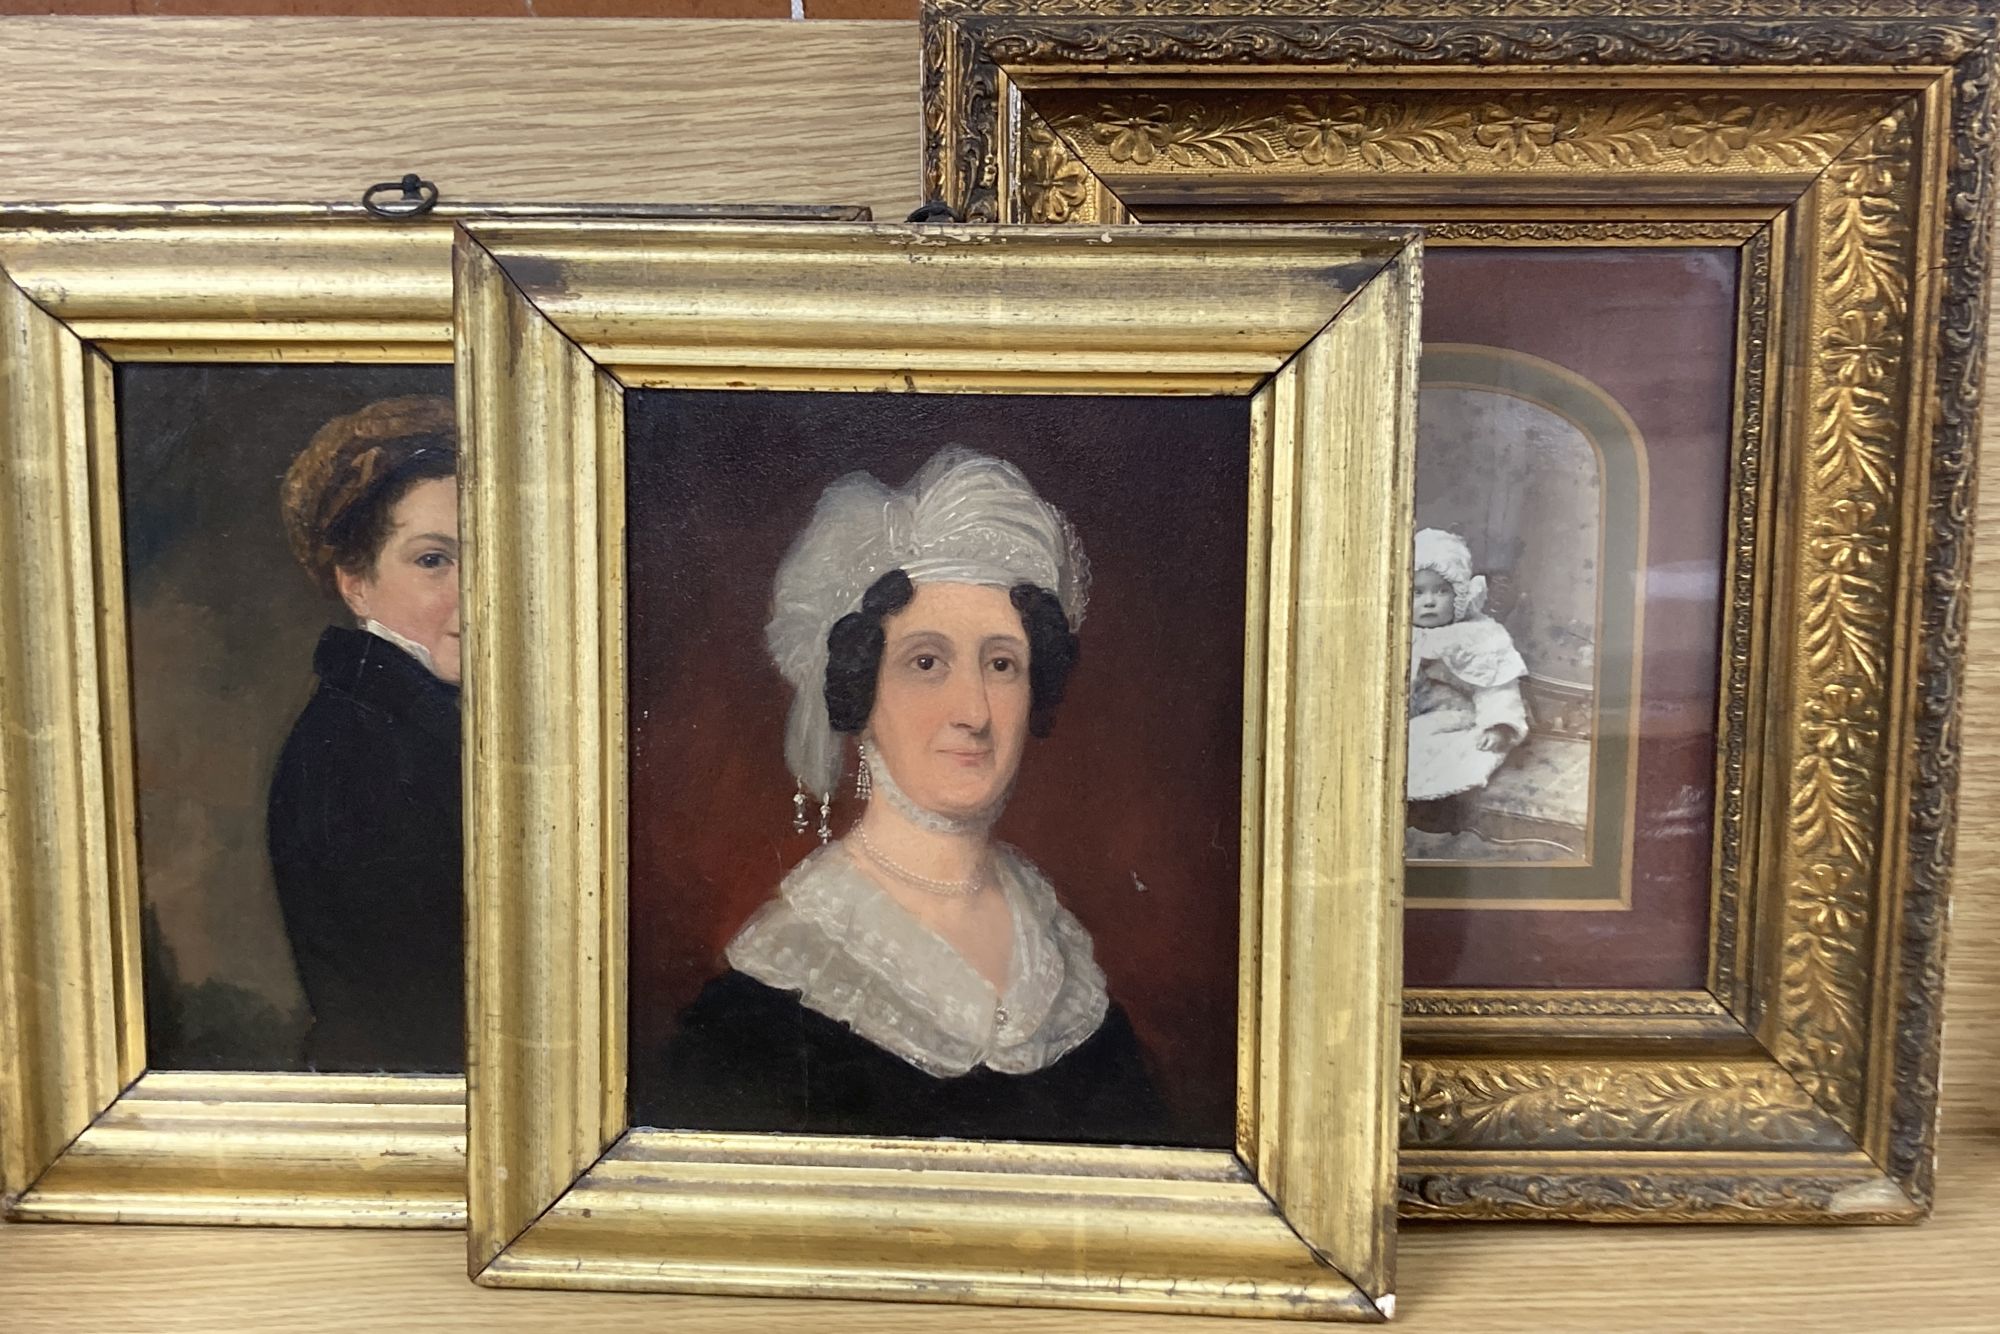 Early 19th century English School, two oils on artists board, Portrait of a lady wearing a lace hat and of a youth, 20 x 16.5cm